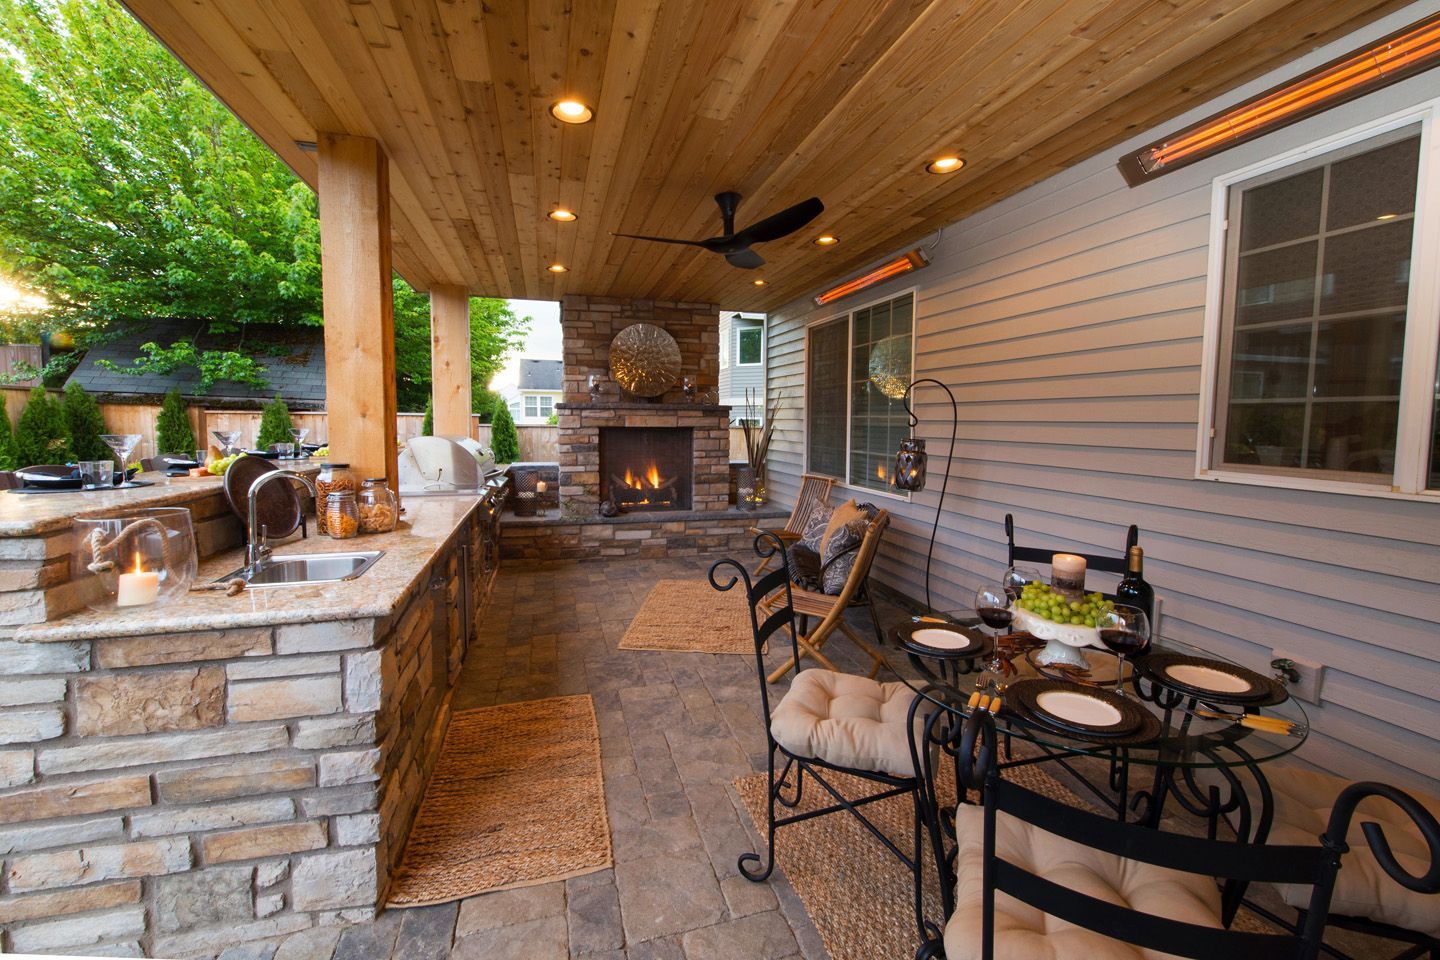 Spacious outdoor kitchen and fireplace under a deck, featuring stainless steel appliances